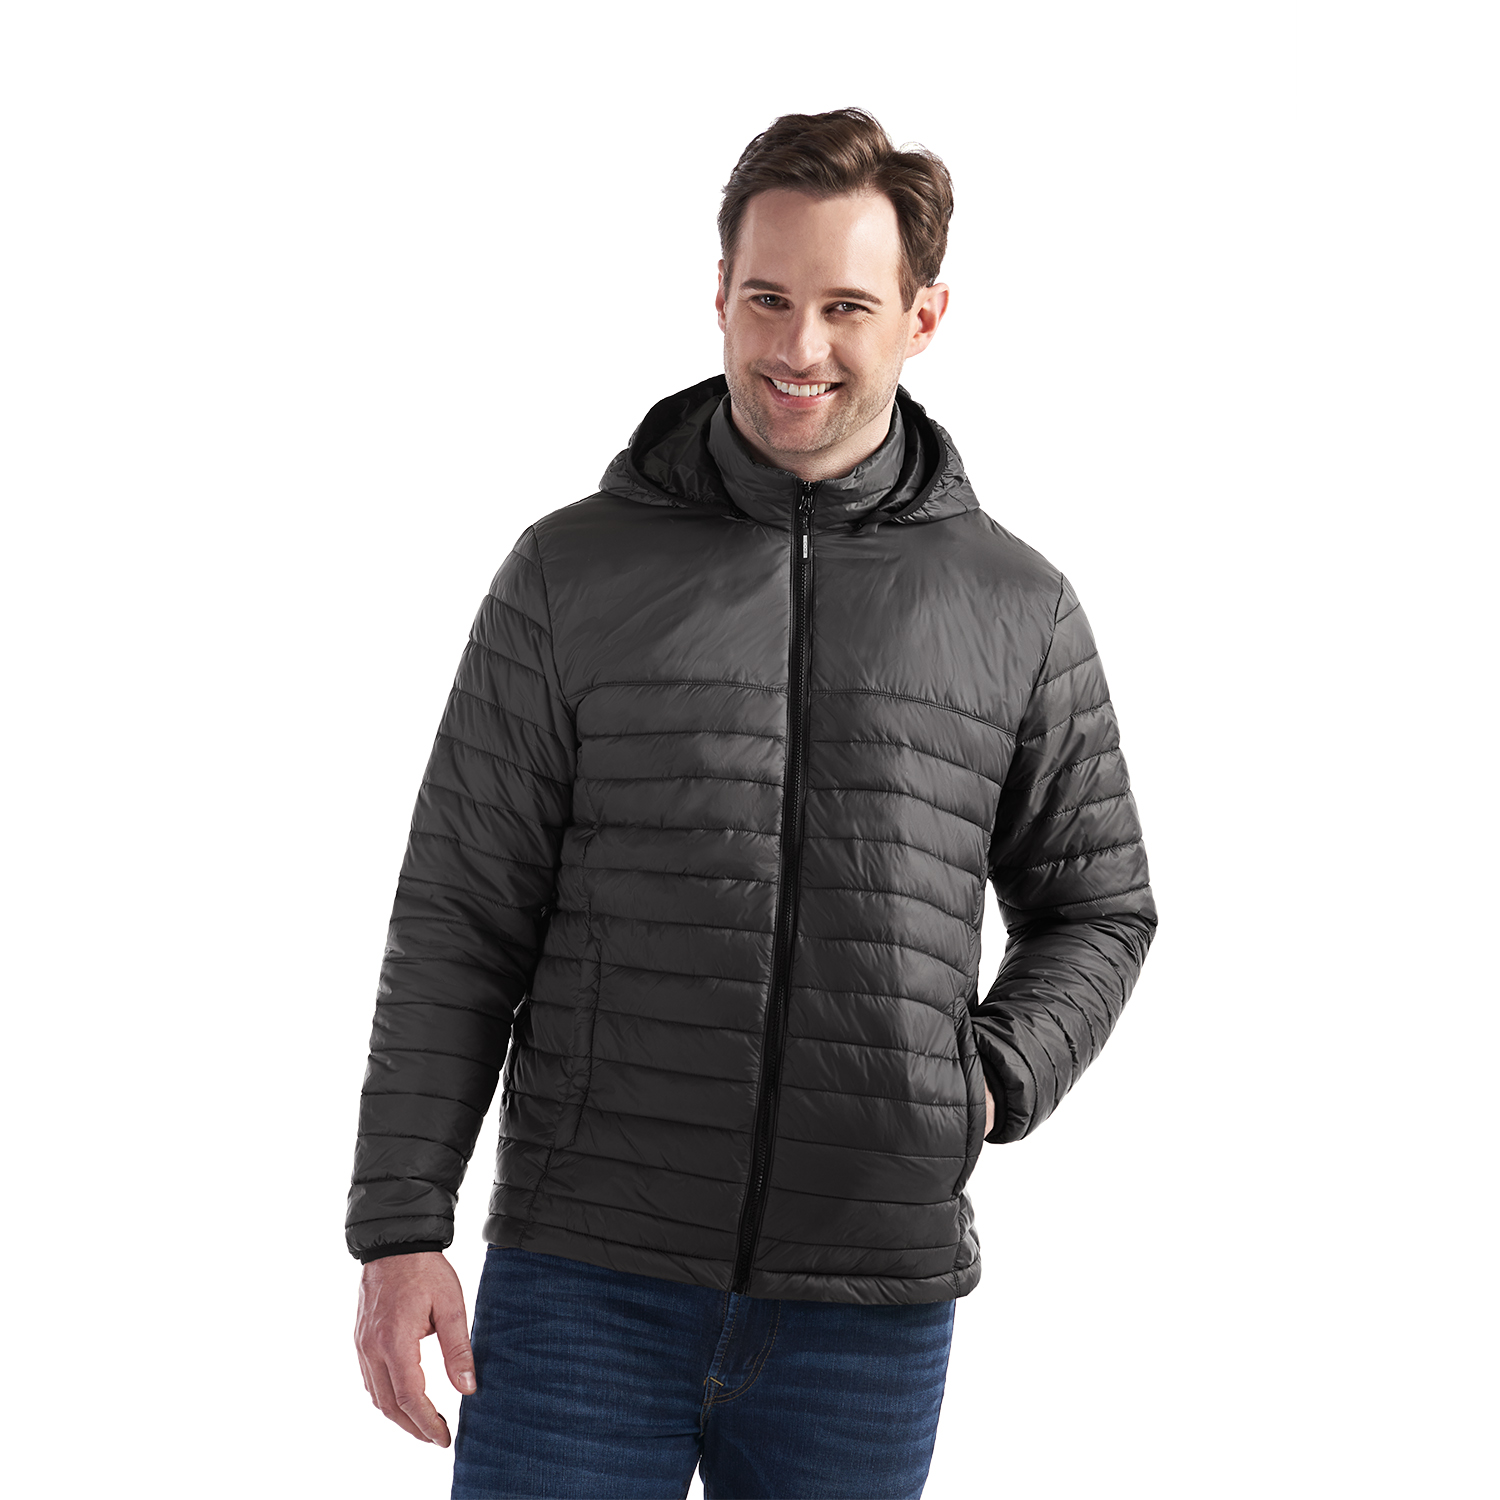 https://workcasualwear.ca/images/thumbs/0002043_cx2-canyon-lightweight-puffy-jacket.jpeg